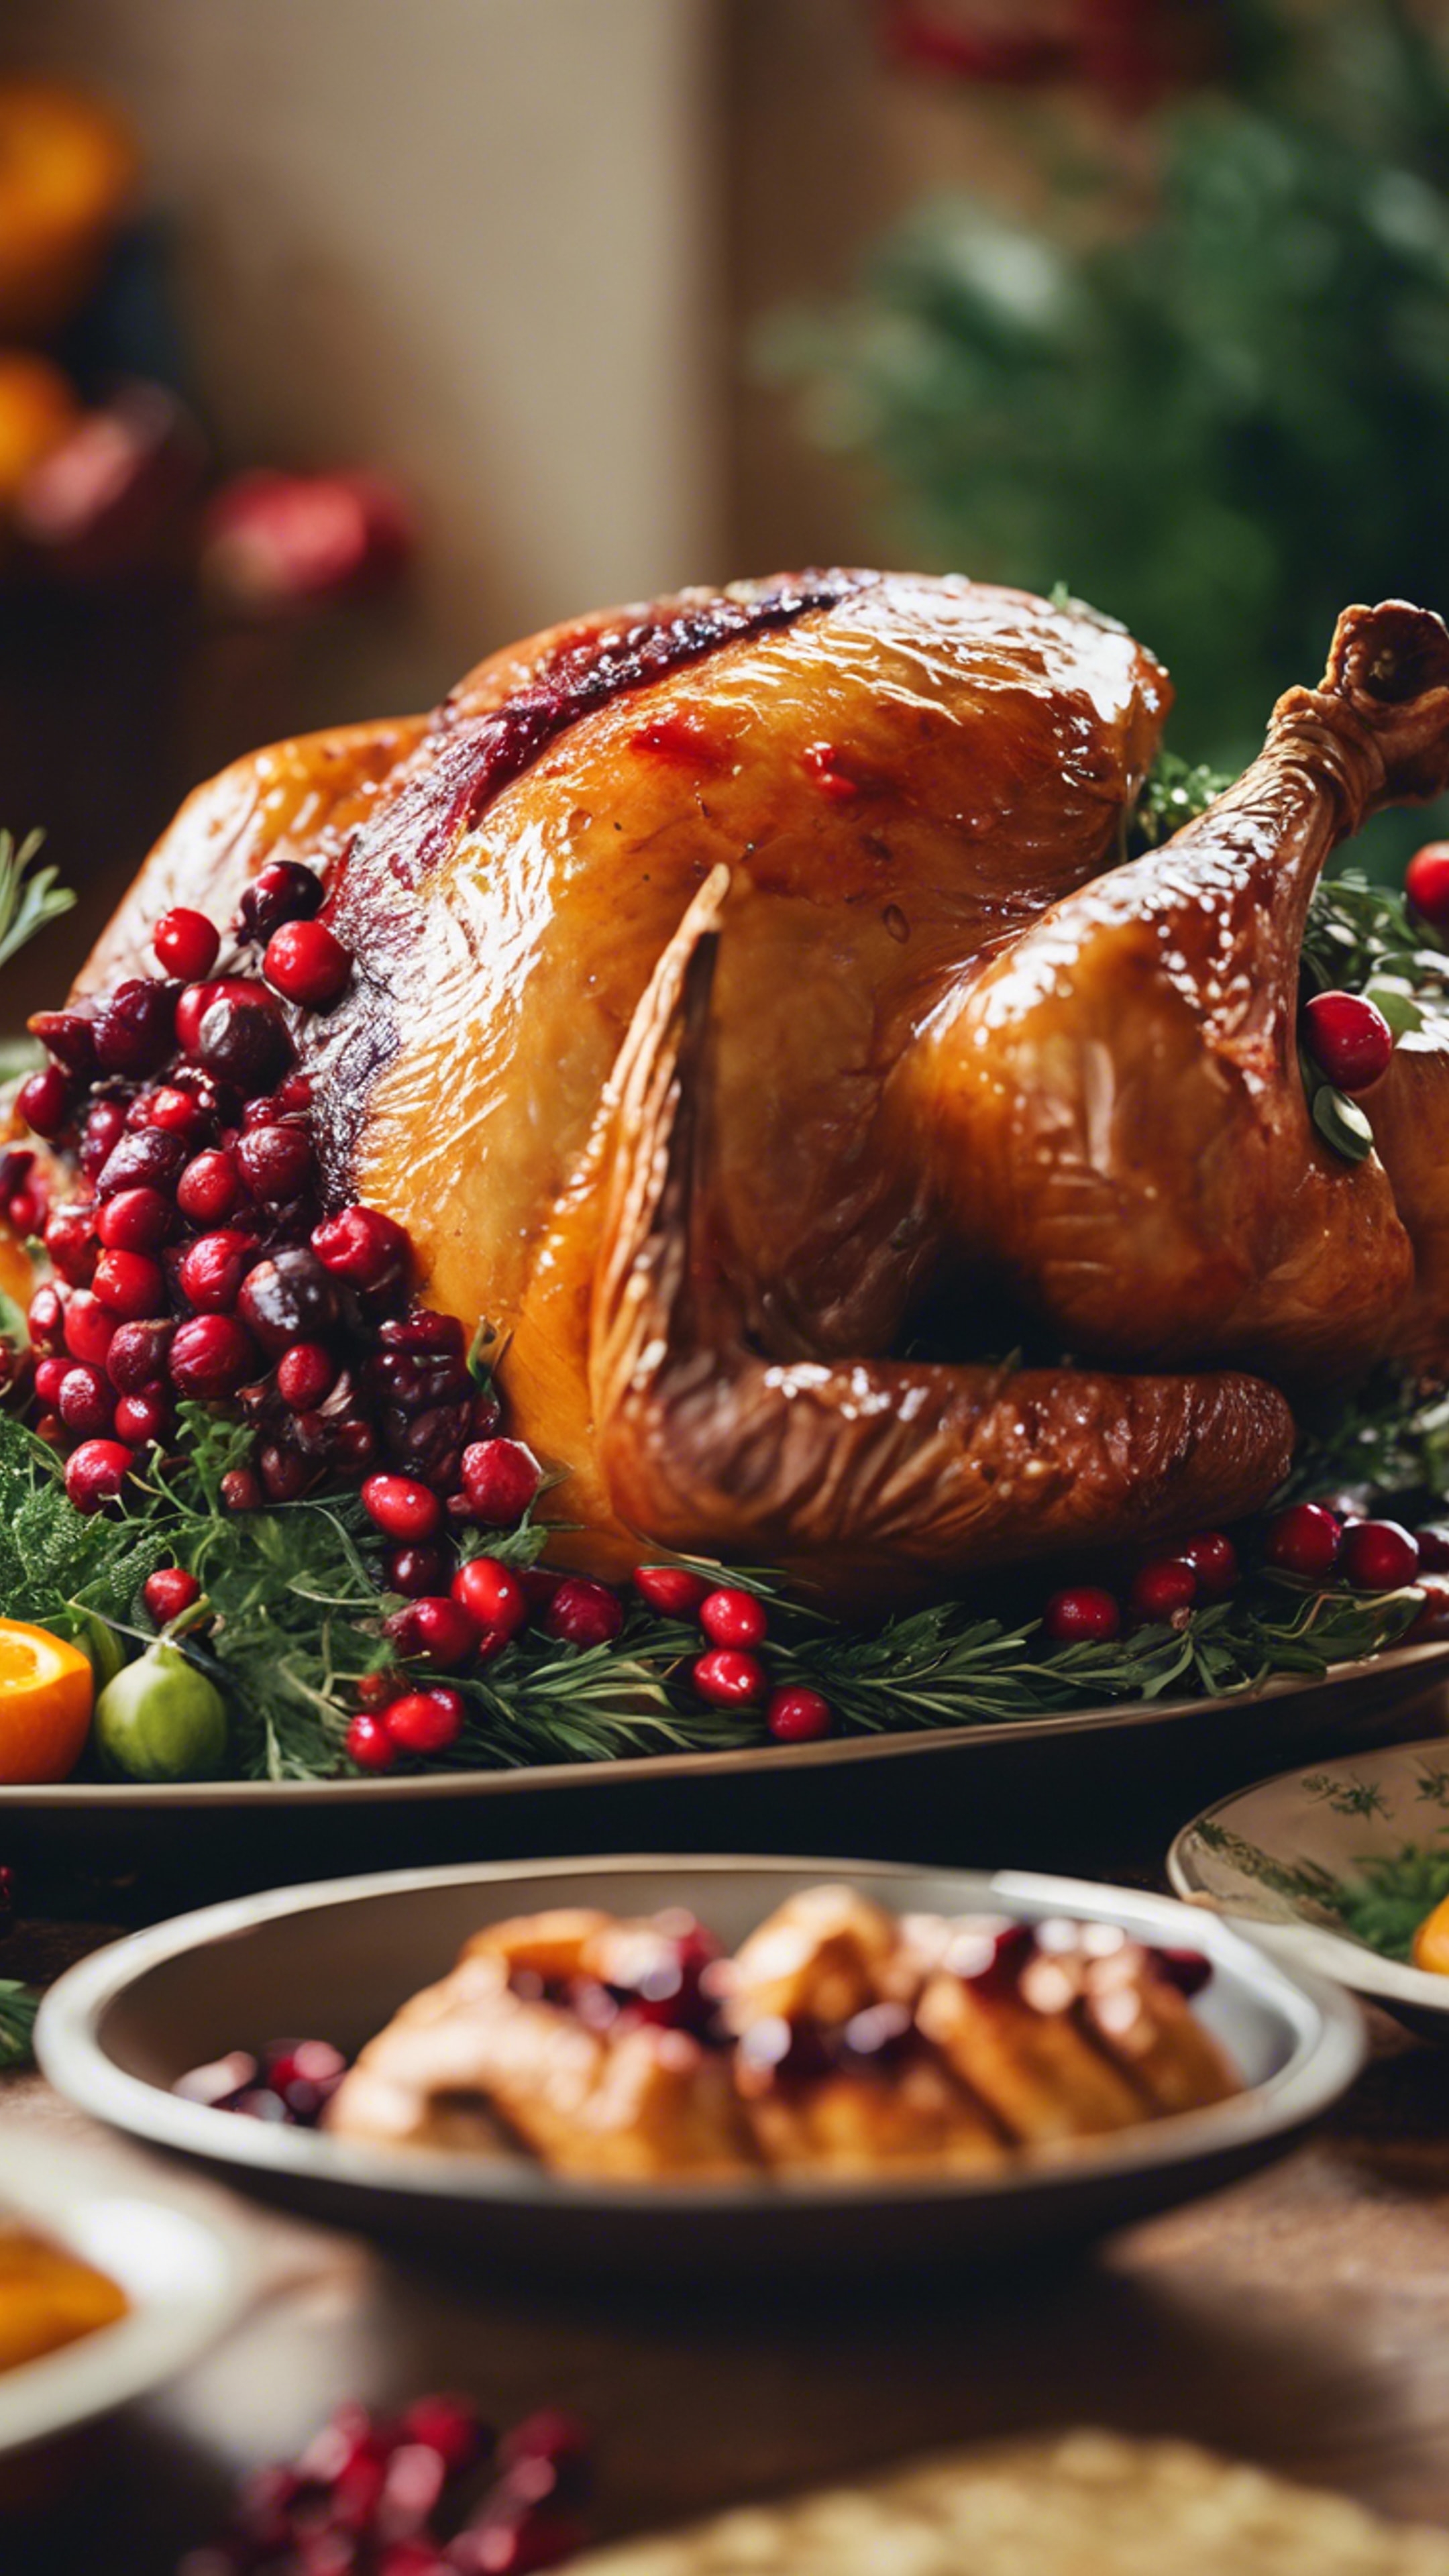 An artistic close-up of a traditional roast turkey on a Thanksgiving table, garnished with cranberries and herbs. Tapeta[f7ada081b7d5471b890d]